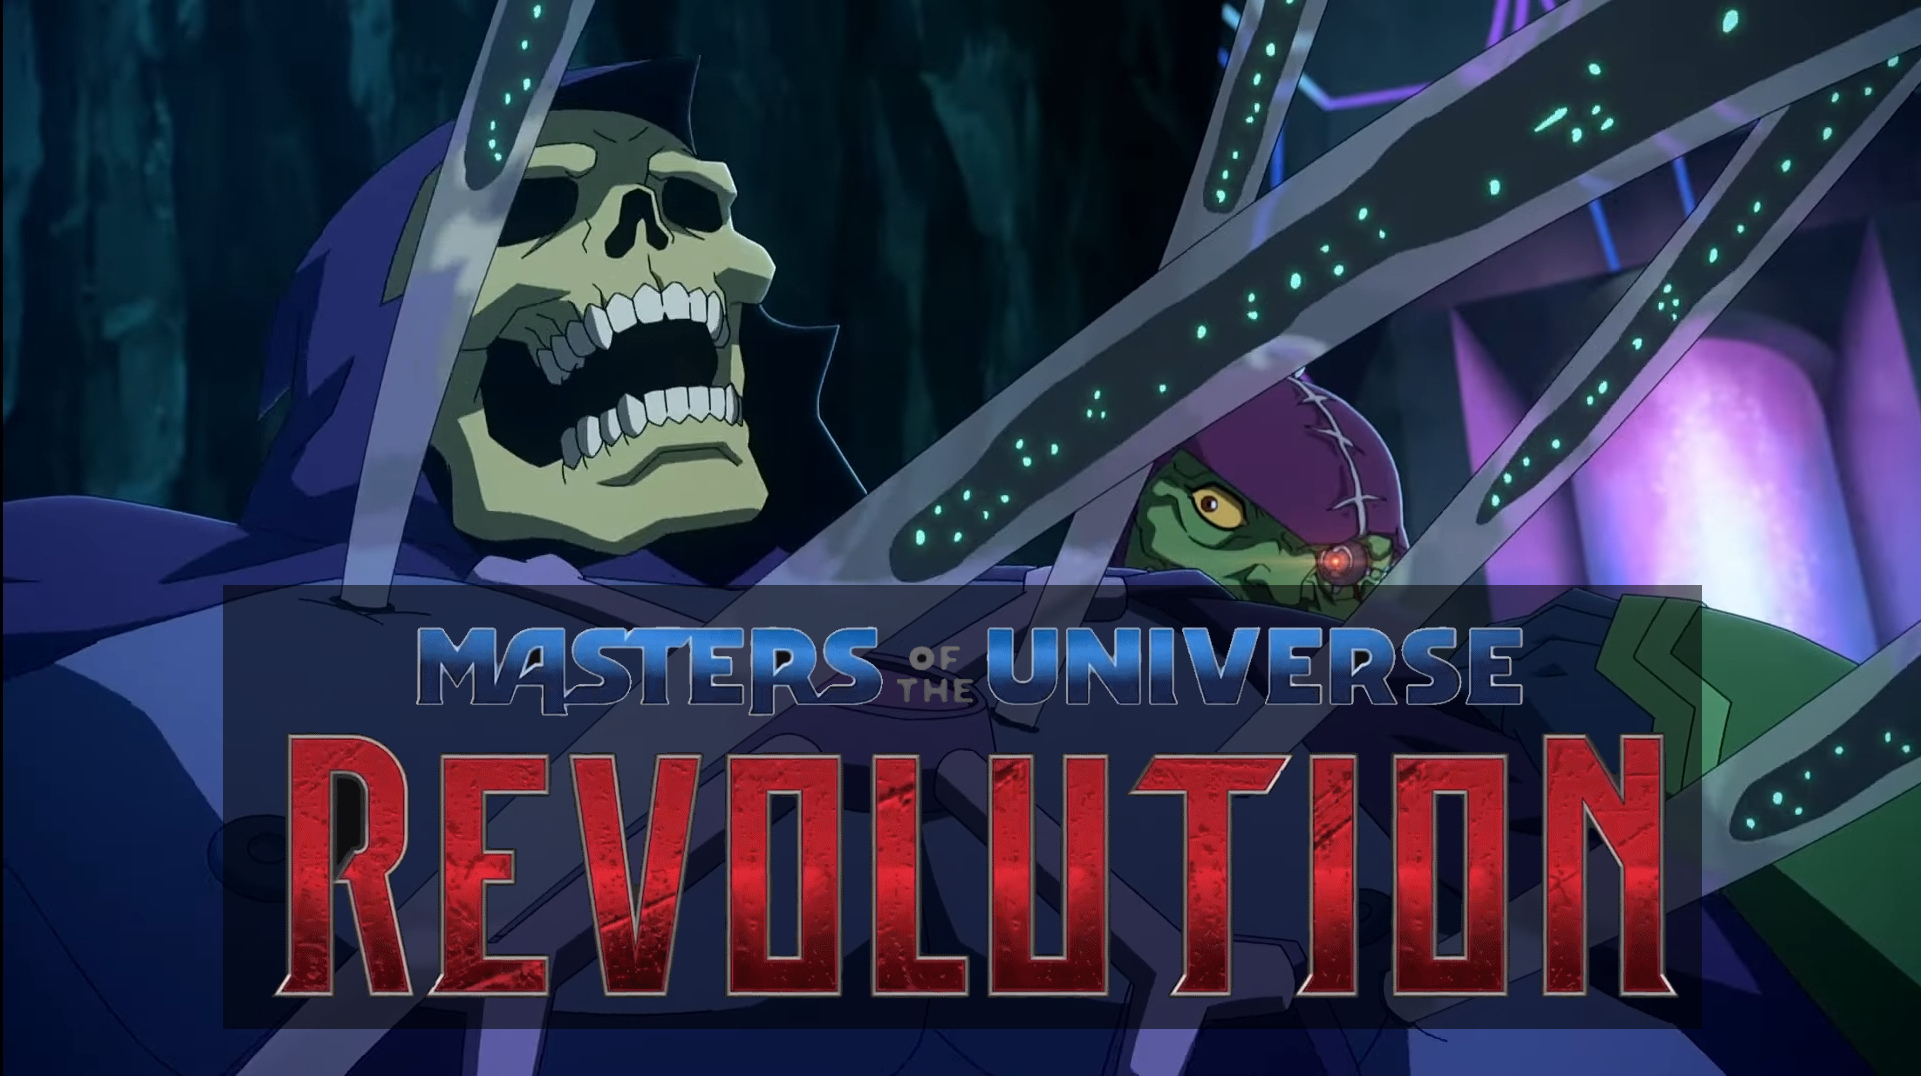 10 THINGS we’ve learned so far about ”Masters of the Universe: Revolution”